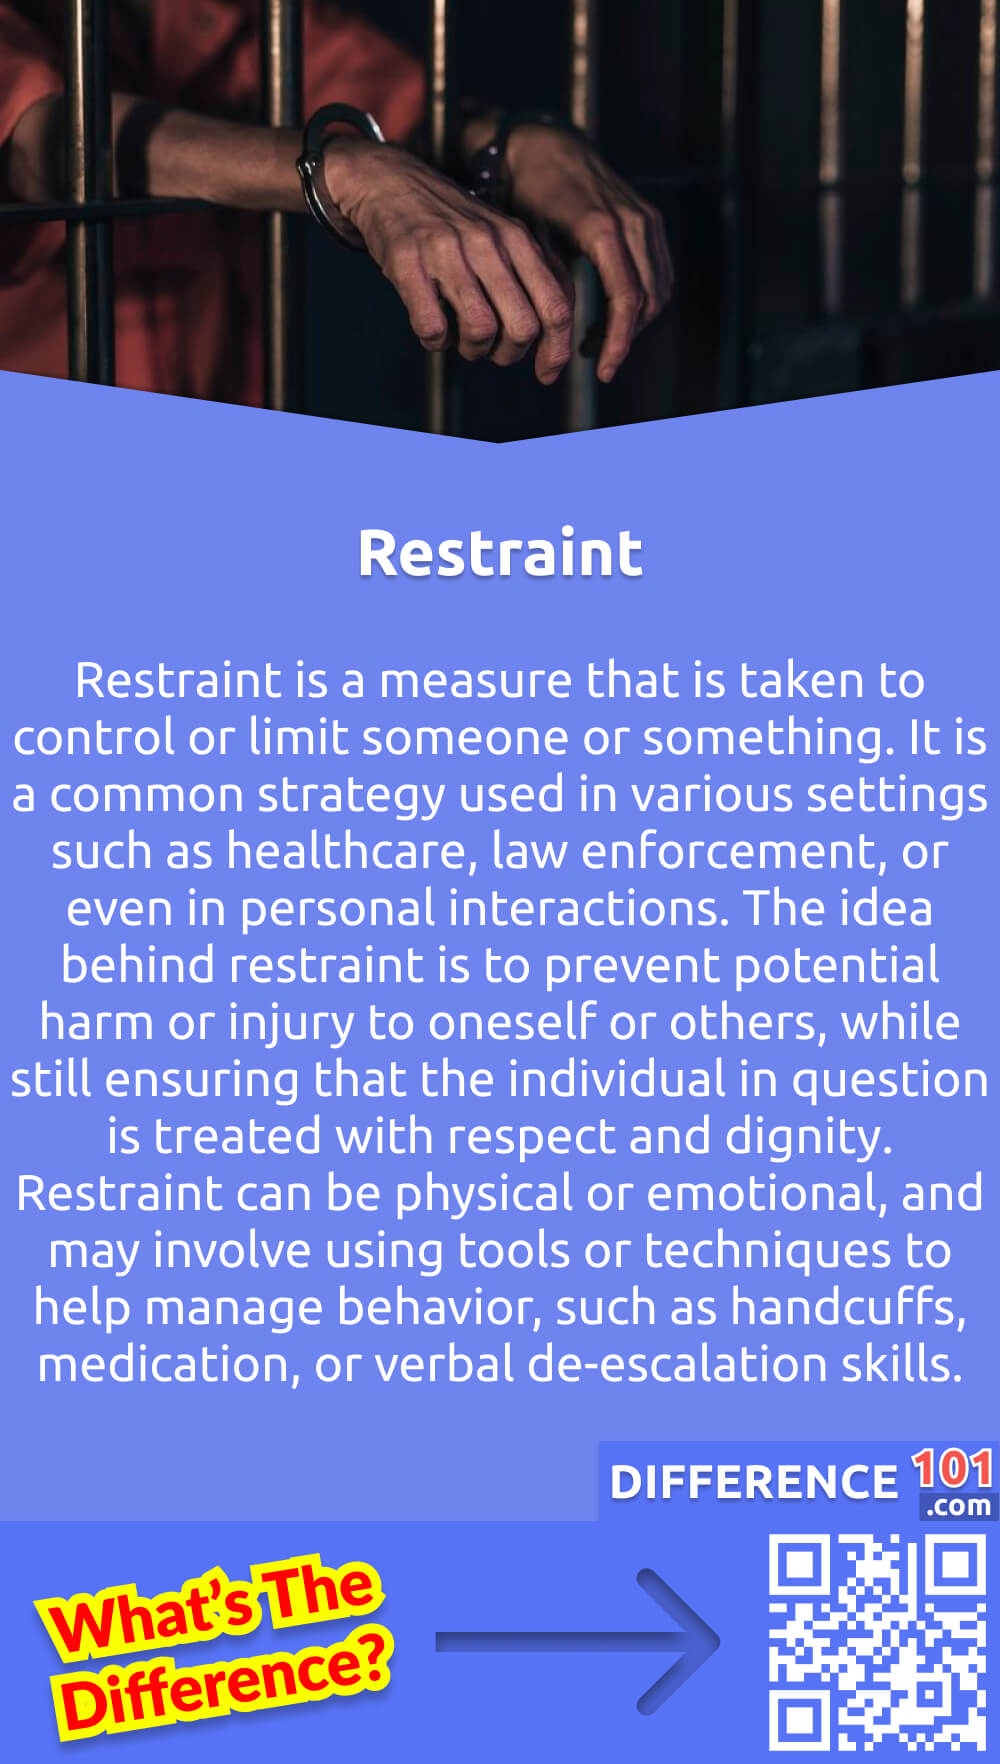 What Is Restraint? Restraint is a measure that is taken to control or limit someone or something. It is a common strategy used in various settings such as healthcare, law enforcement, or even in personal interactions. The idea behind restraint is to prevent potential harm or injury to oneself or others, while still ensuring that the individual in question is treated with respect and dignity. Restraint can be physical or emotional, and may involve using tools or techniques to help manage behavior, such as handcuffs, medication, or verbal de-escalation skills. When used appropriately, restraint can help prevent situations from escalating and promote safety and well-being for all parties involved.